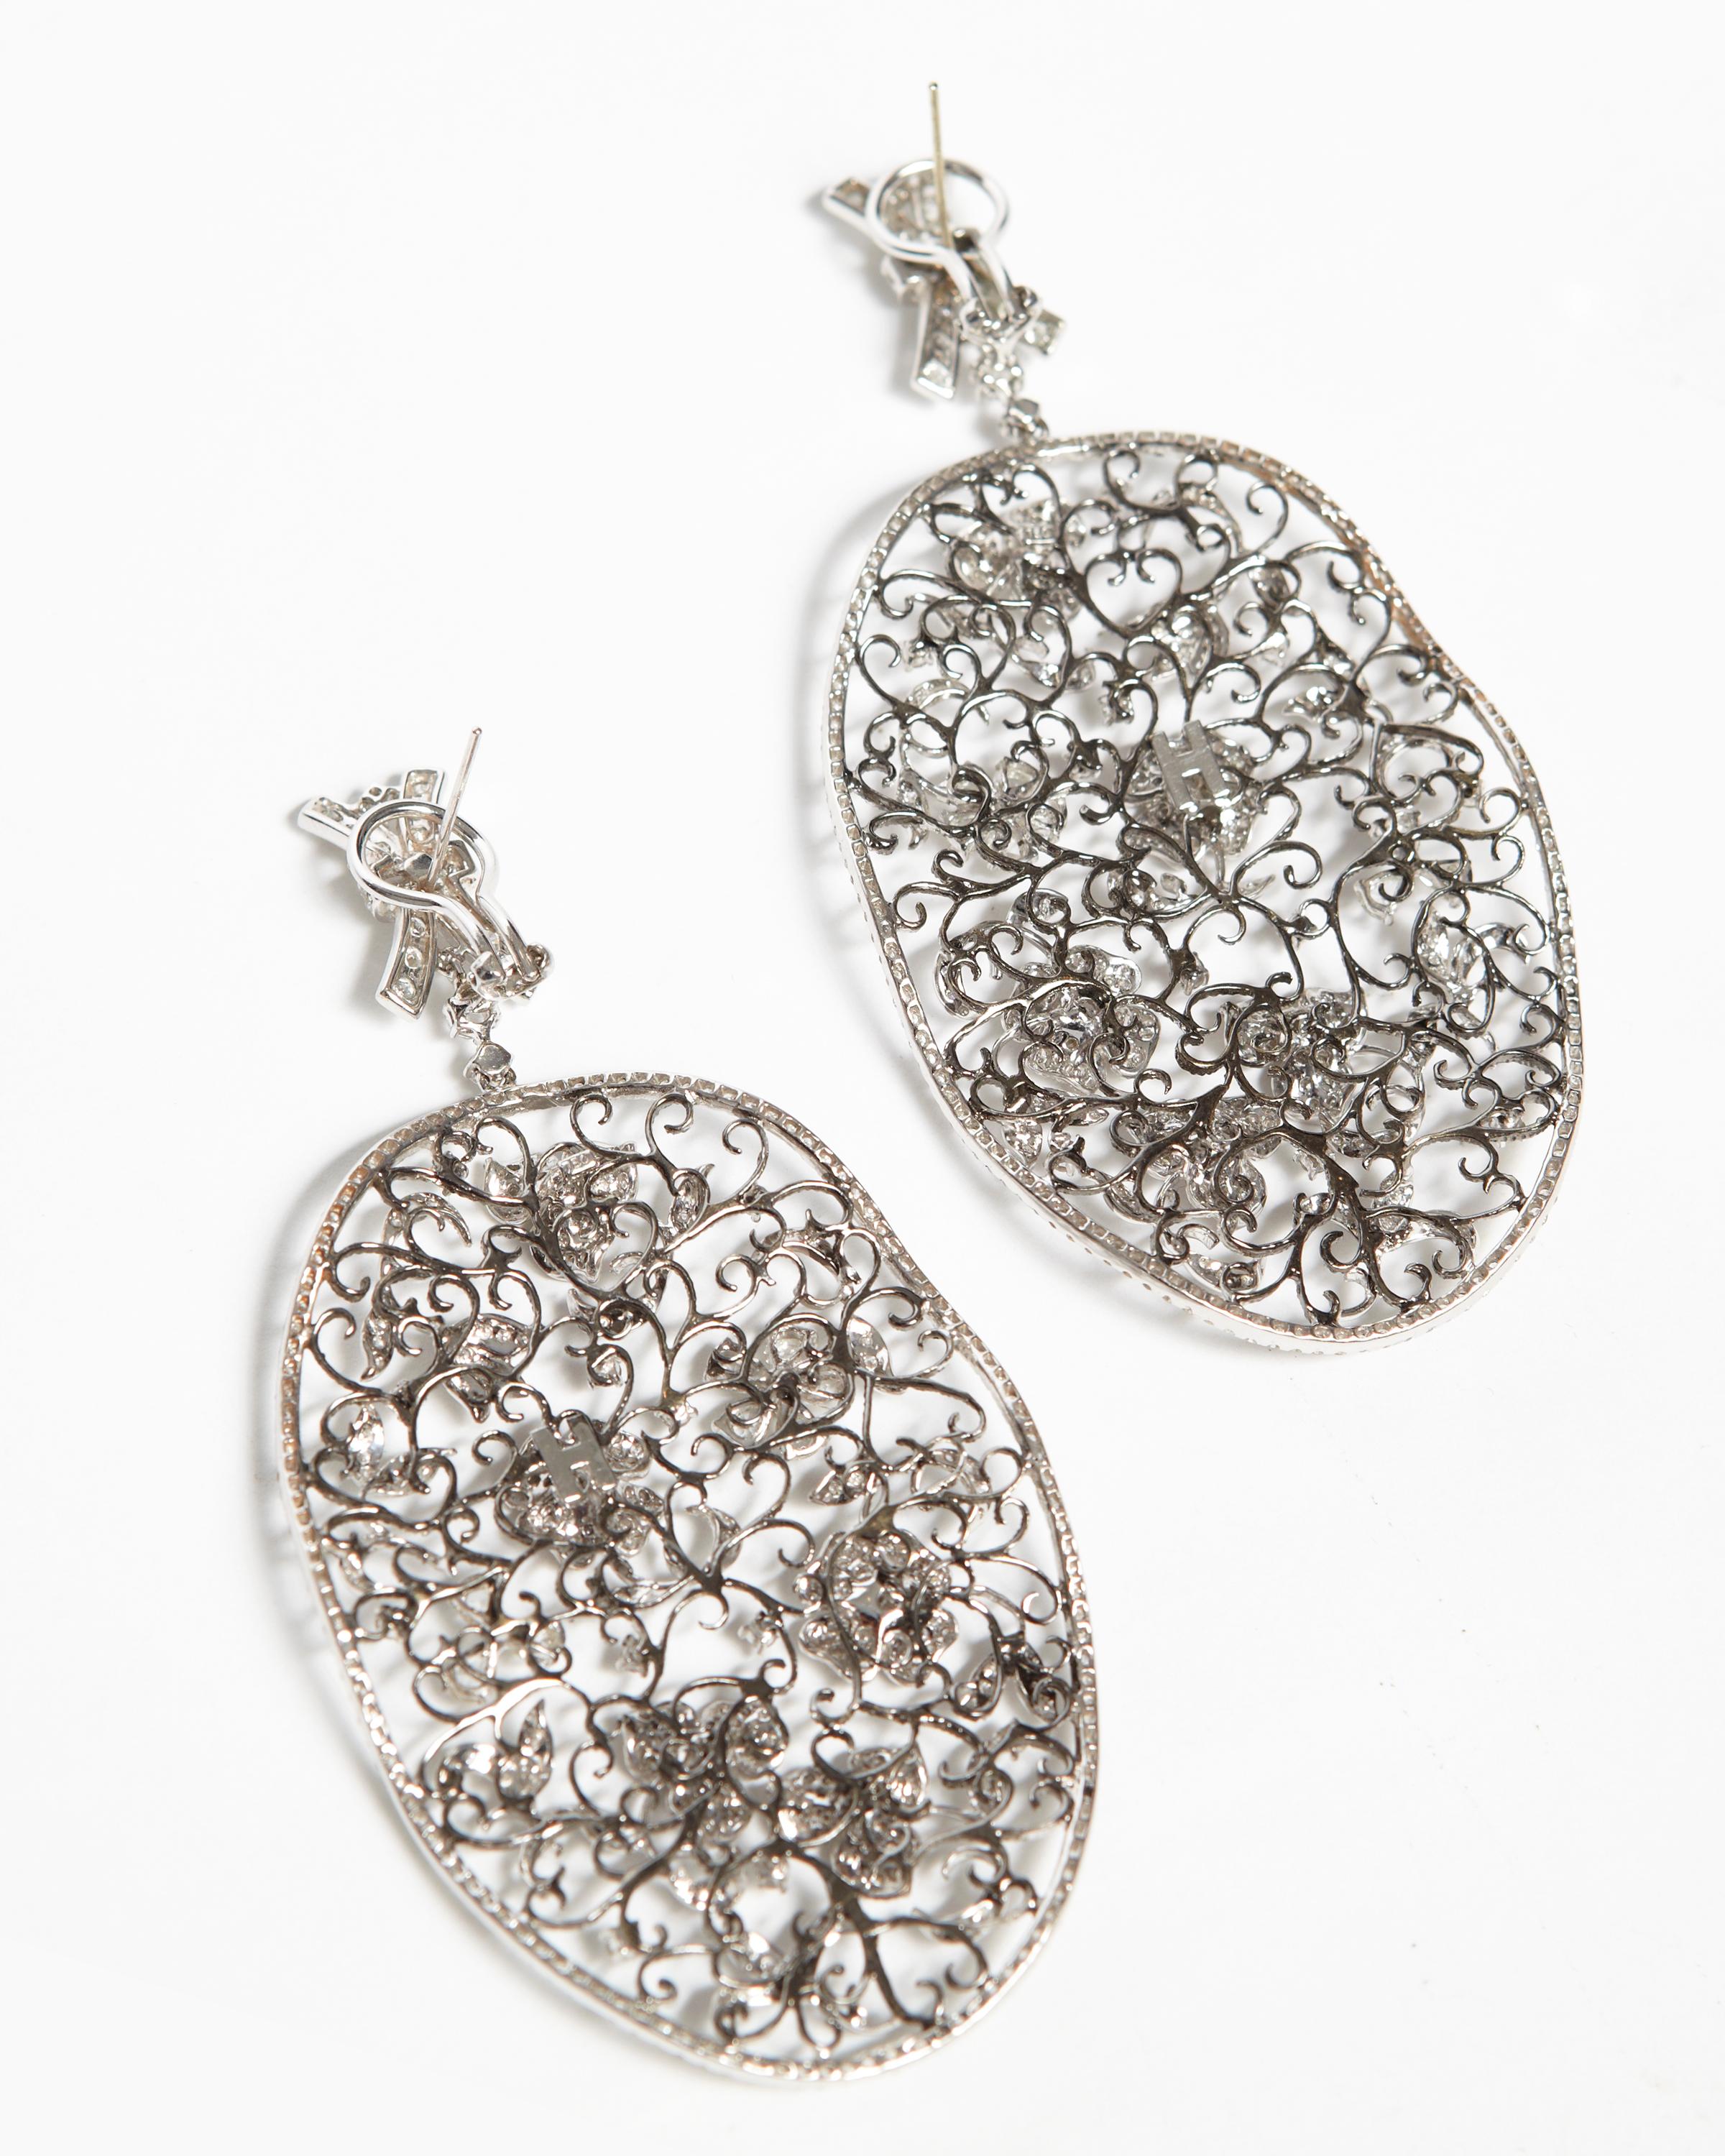 Helen Yarmak 18 Karat White Gold and Diamond Filigree Earrings In New Condition For Sale In New York, NY